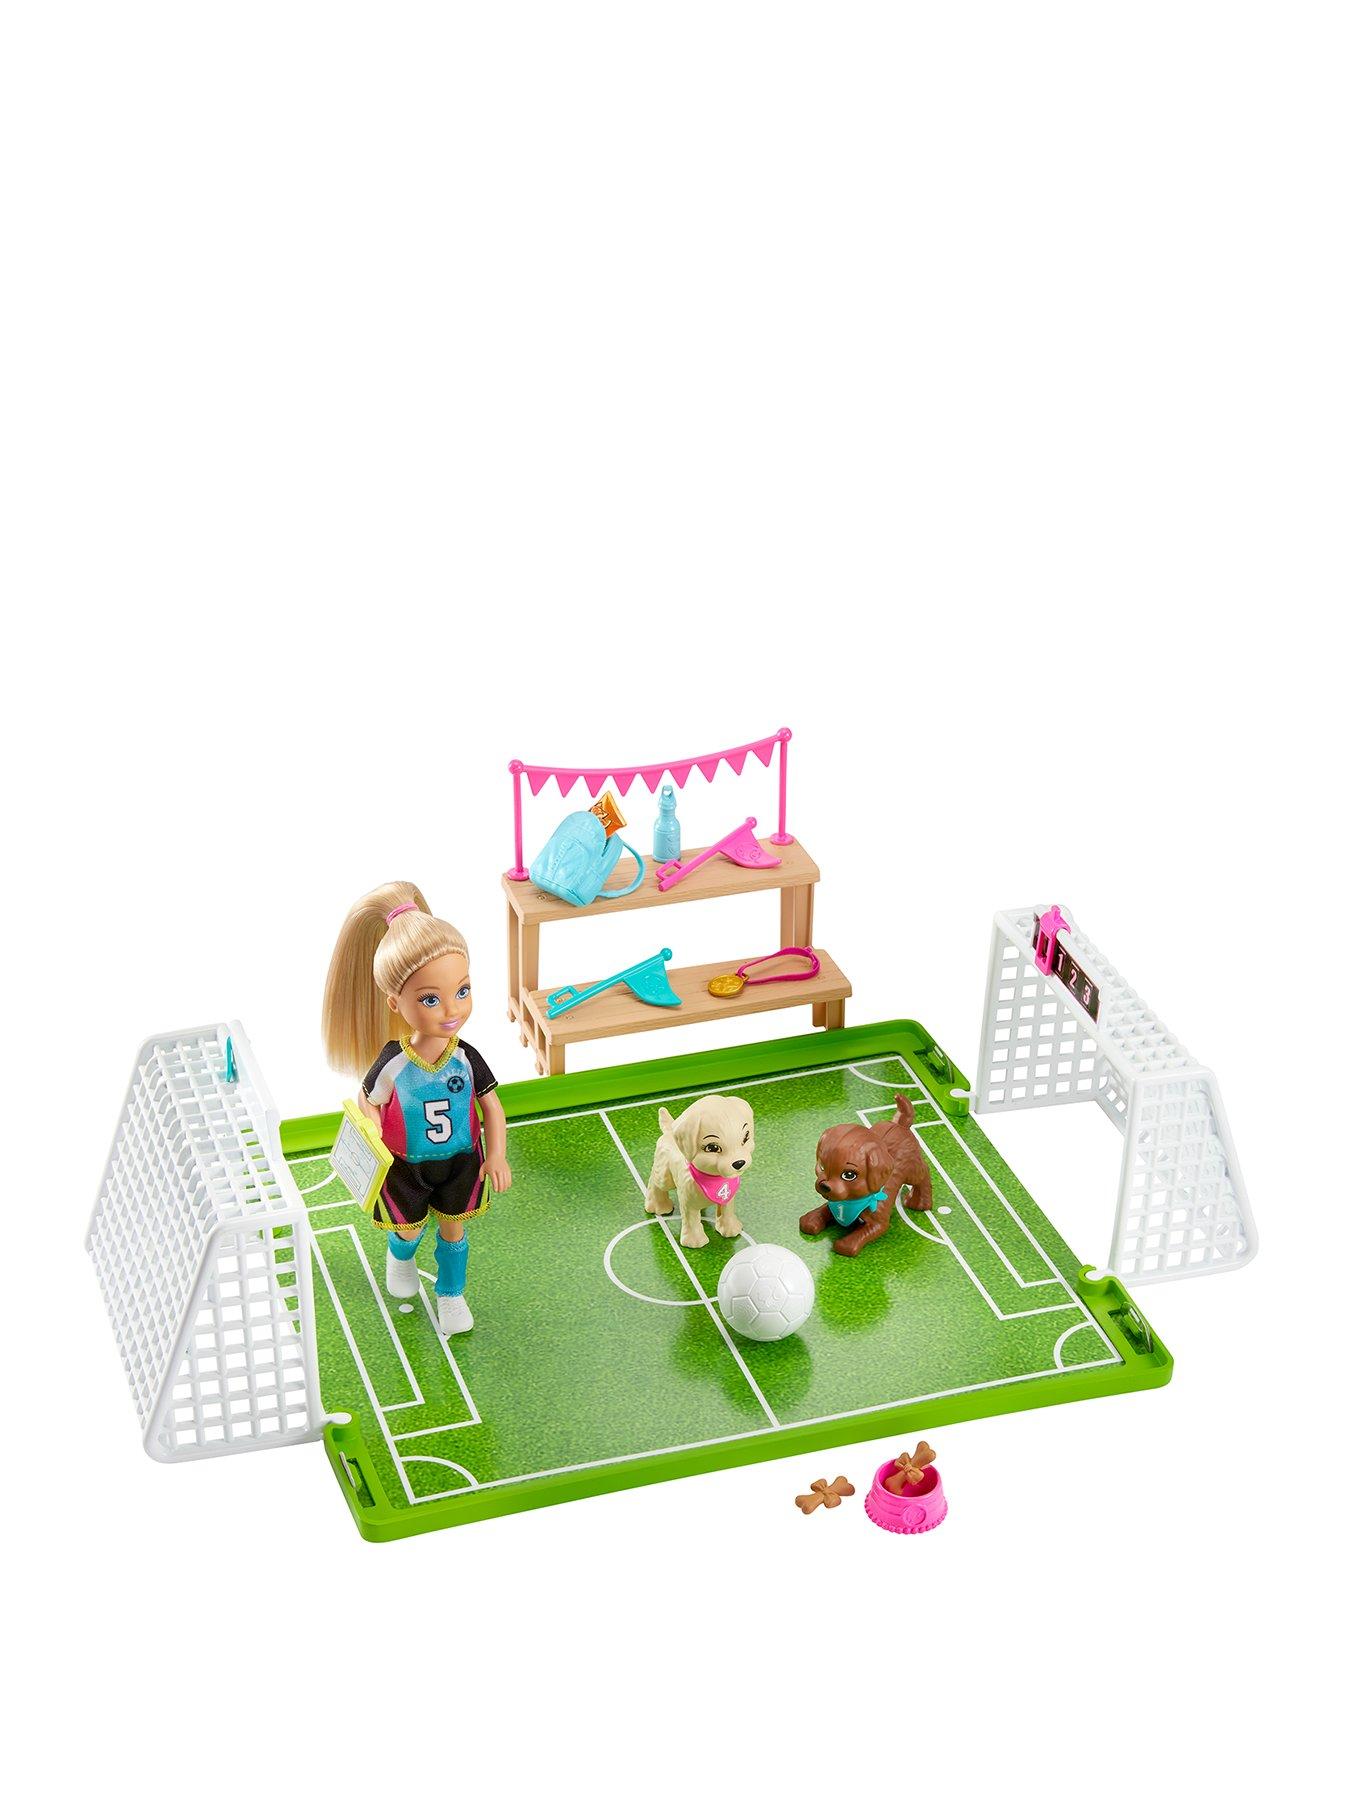 barbie chelsea playset with two dolls included